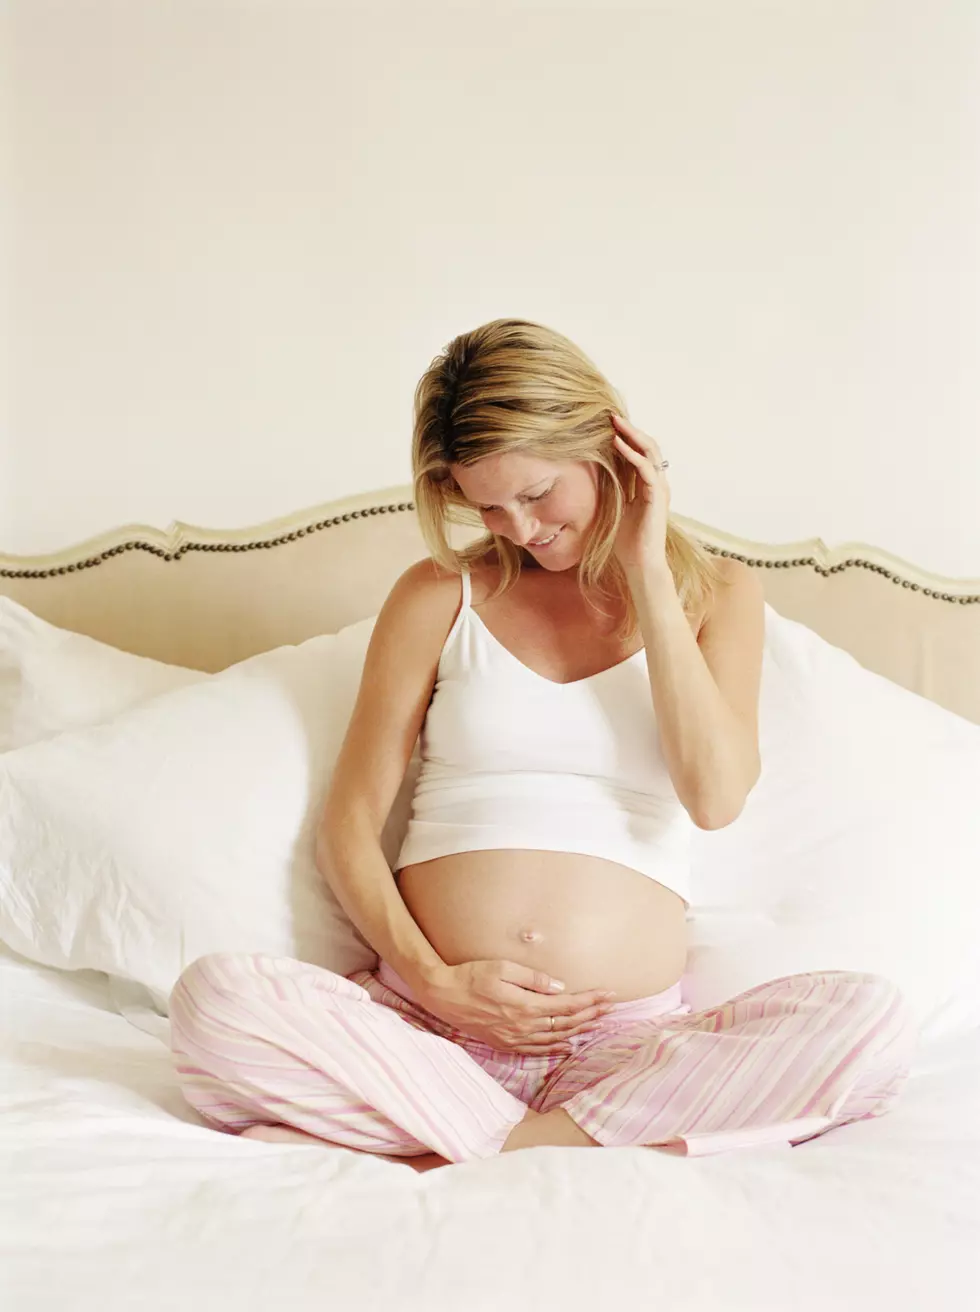 OPP-Does This Pregnant Woman Share Her Secret Or Not?